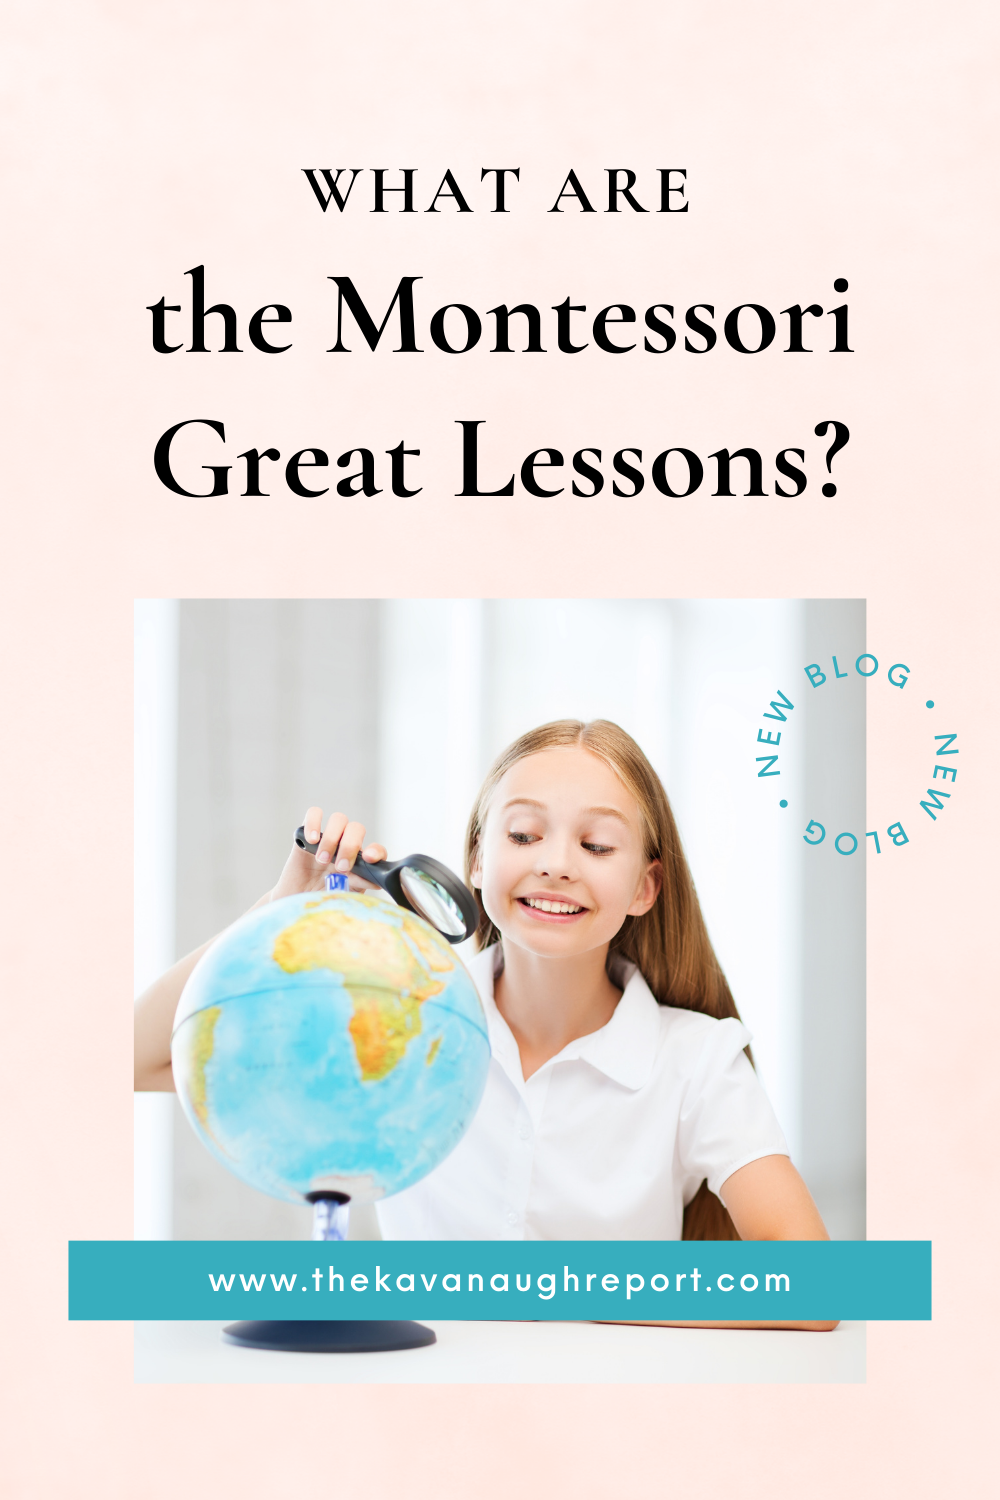 Did you know that Montessori education goes well beyond preschool? Discover the vast universe of knowledge that awaits older children in our exploration of the Montessori Great Lessons. This big-picture approach encourages a child's natural curiosity and feeds their hunger for a deeper understanding of the world.